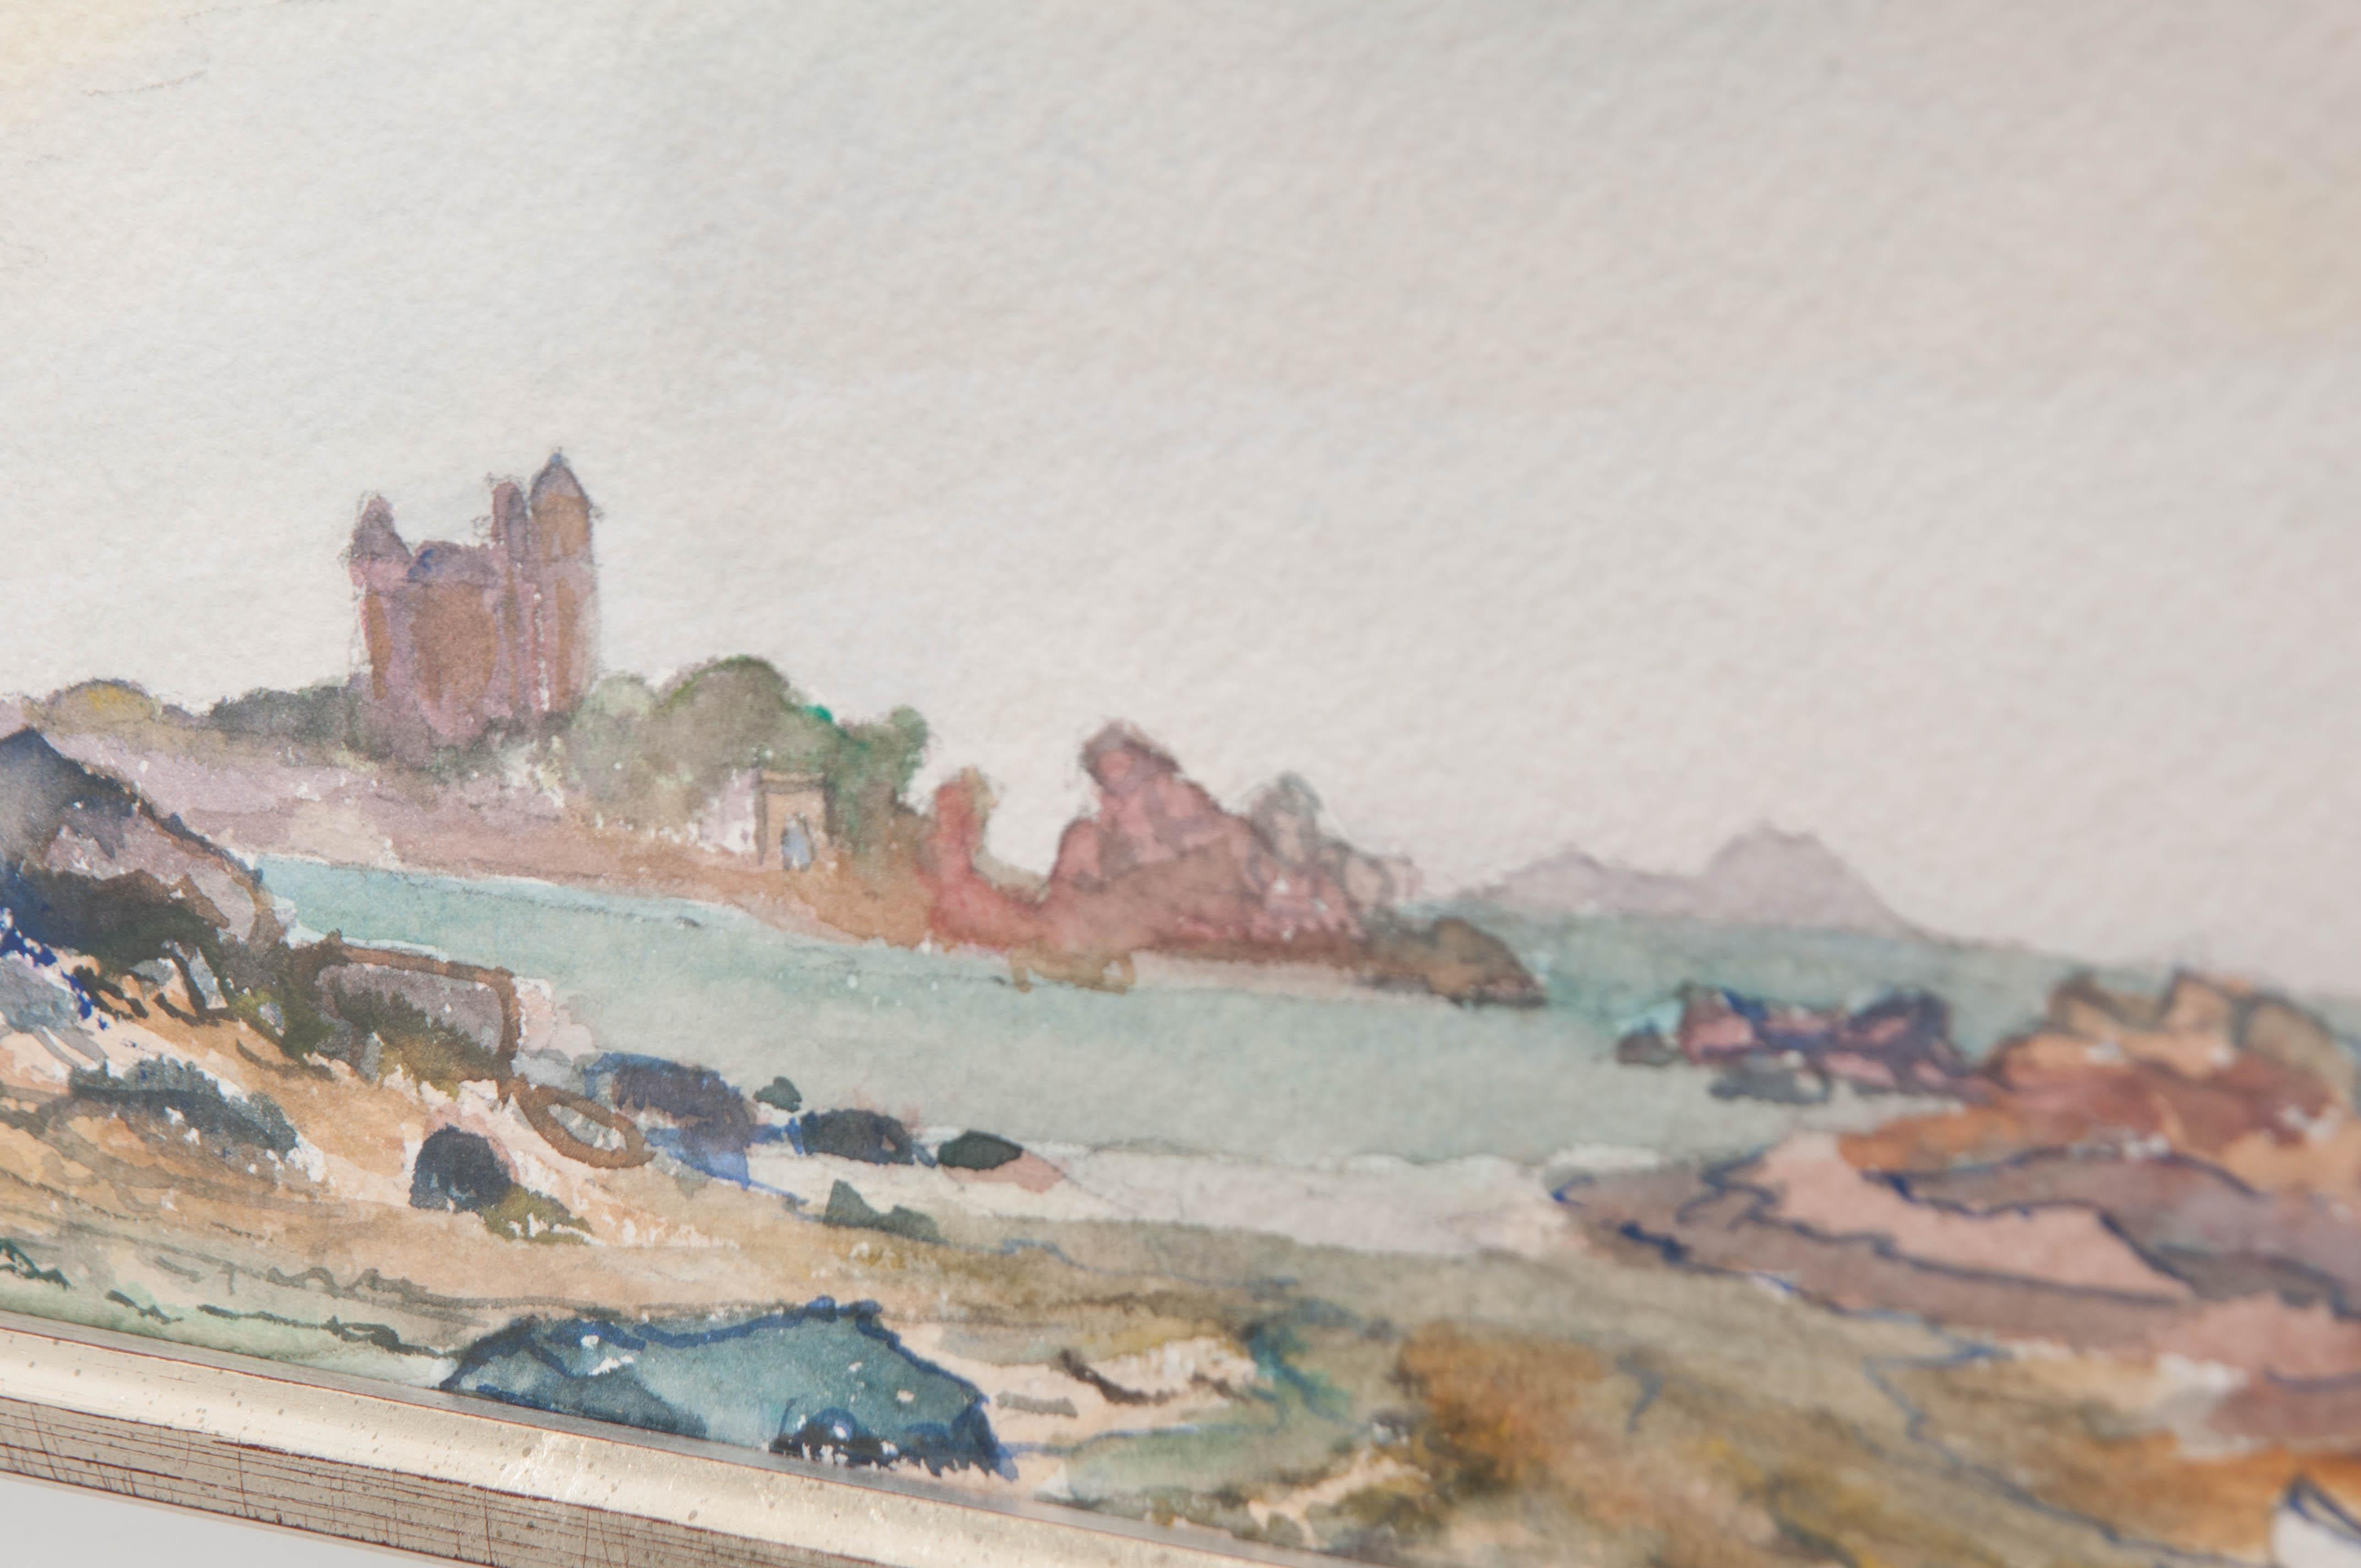 This fine watercolor on paper, circa 1890, is from France and depicts a quiet rocky shoreline with a small bateau and a castle in the distance. It would work beautifully grouped with other small works.